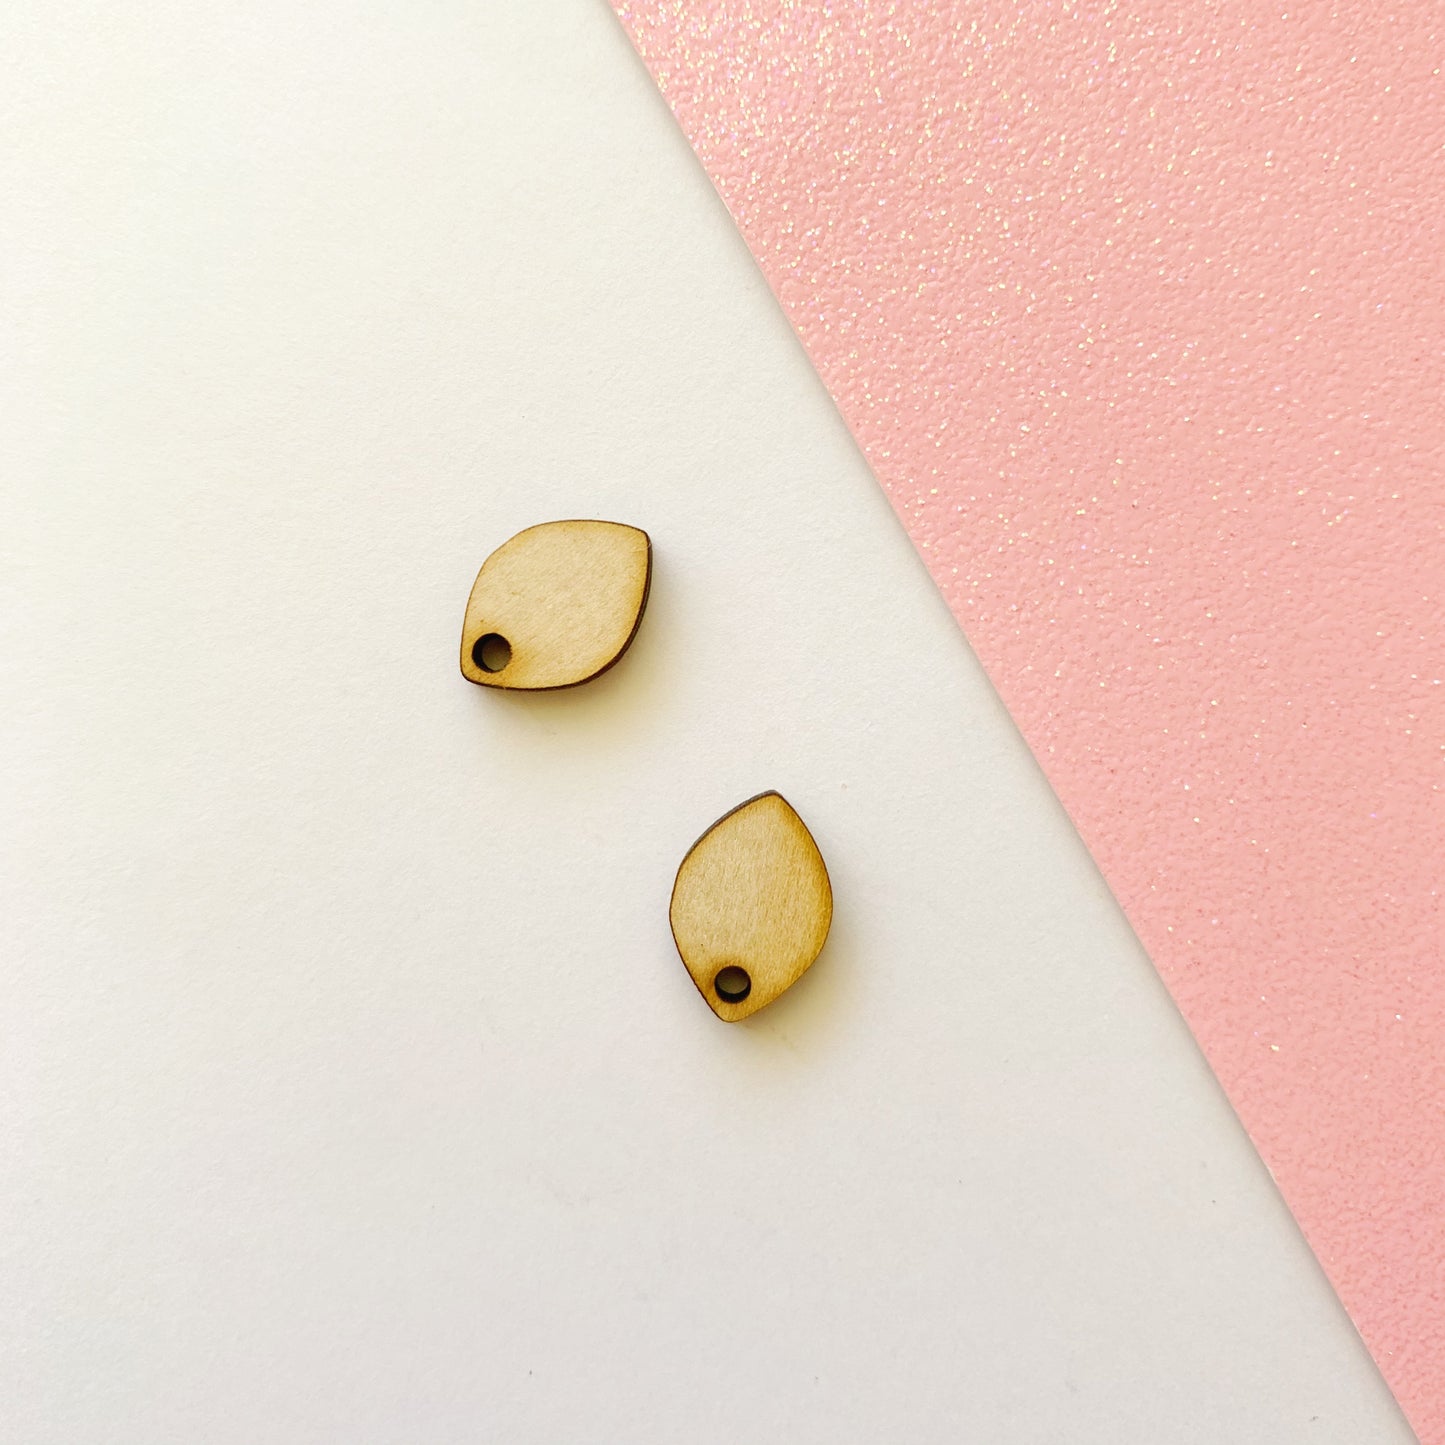 Pair of Cat's Eye 15mm Stud Blanks with Holes